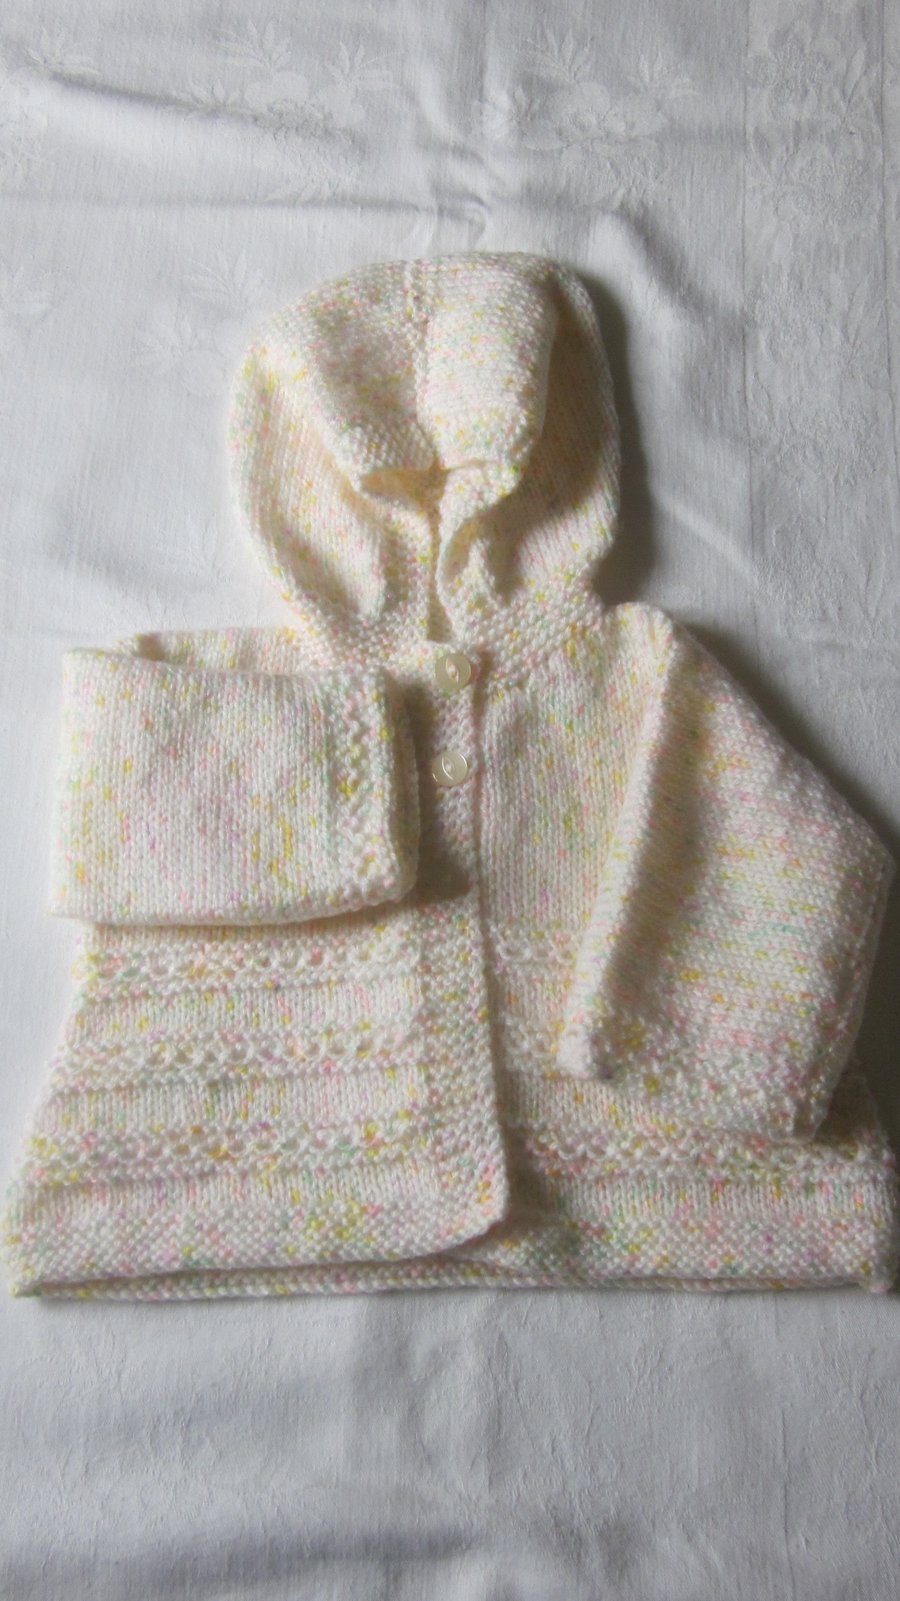 Hooded jacket in cream fleck yarn to fit 22" chest